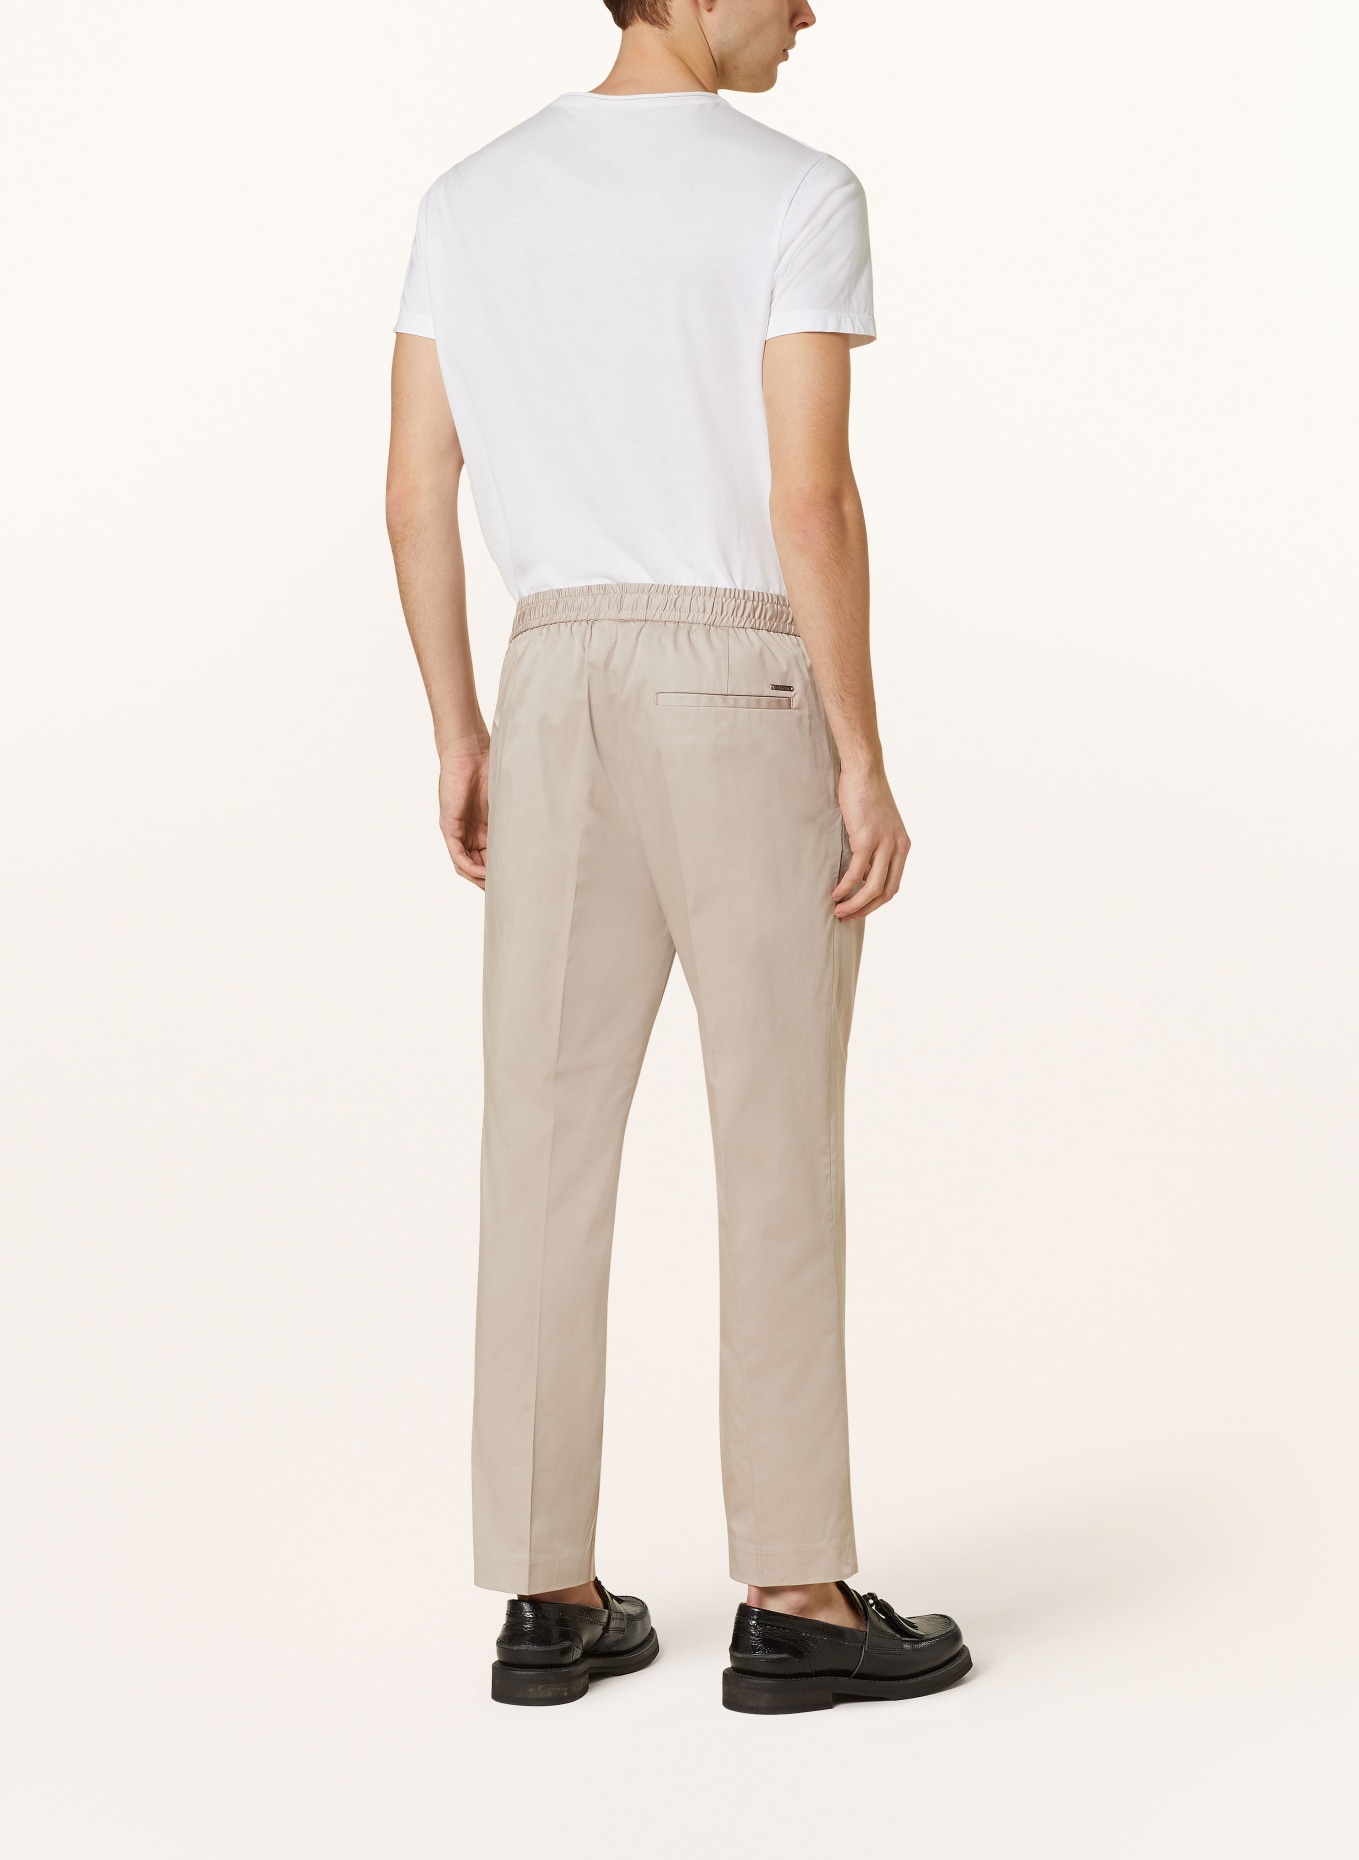 Calvin Klein Pants in jogger style, Color: BEIGE (Image 3)